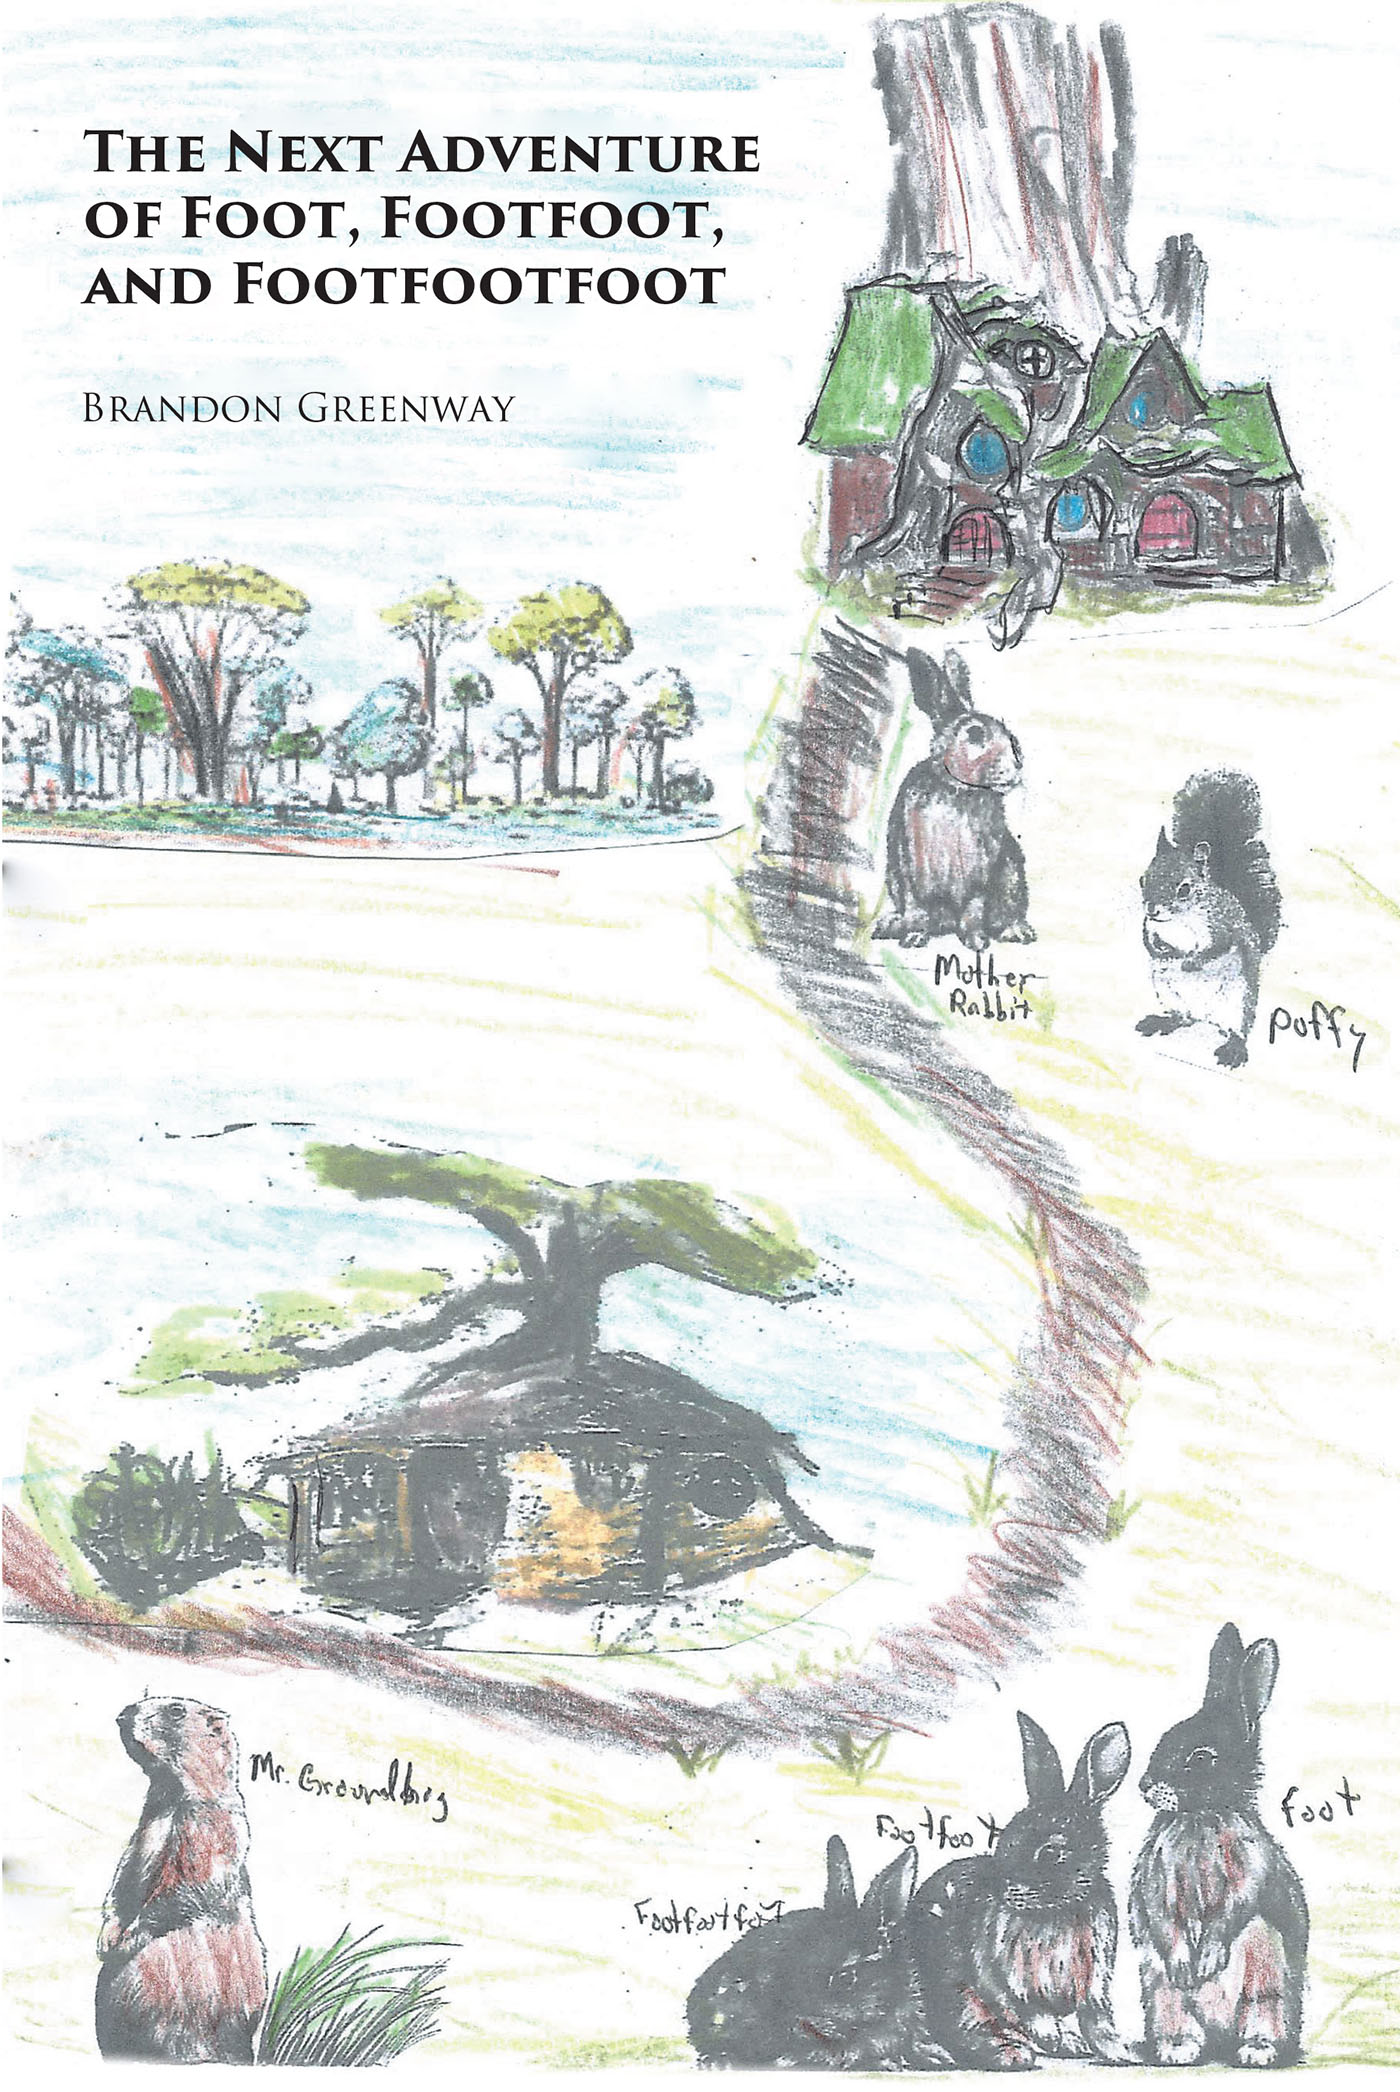 Author Brandon Greenway’s New Book, "The Next Adventure of Foot, Footfoot, and Footfootfoot," Follows a Family of Rabbits Who Find a Trunk Full of Secrets from Their Past